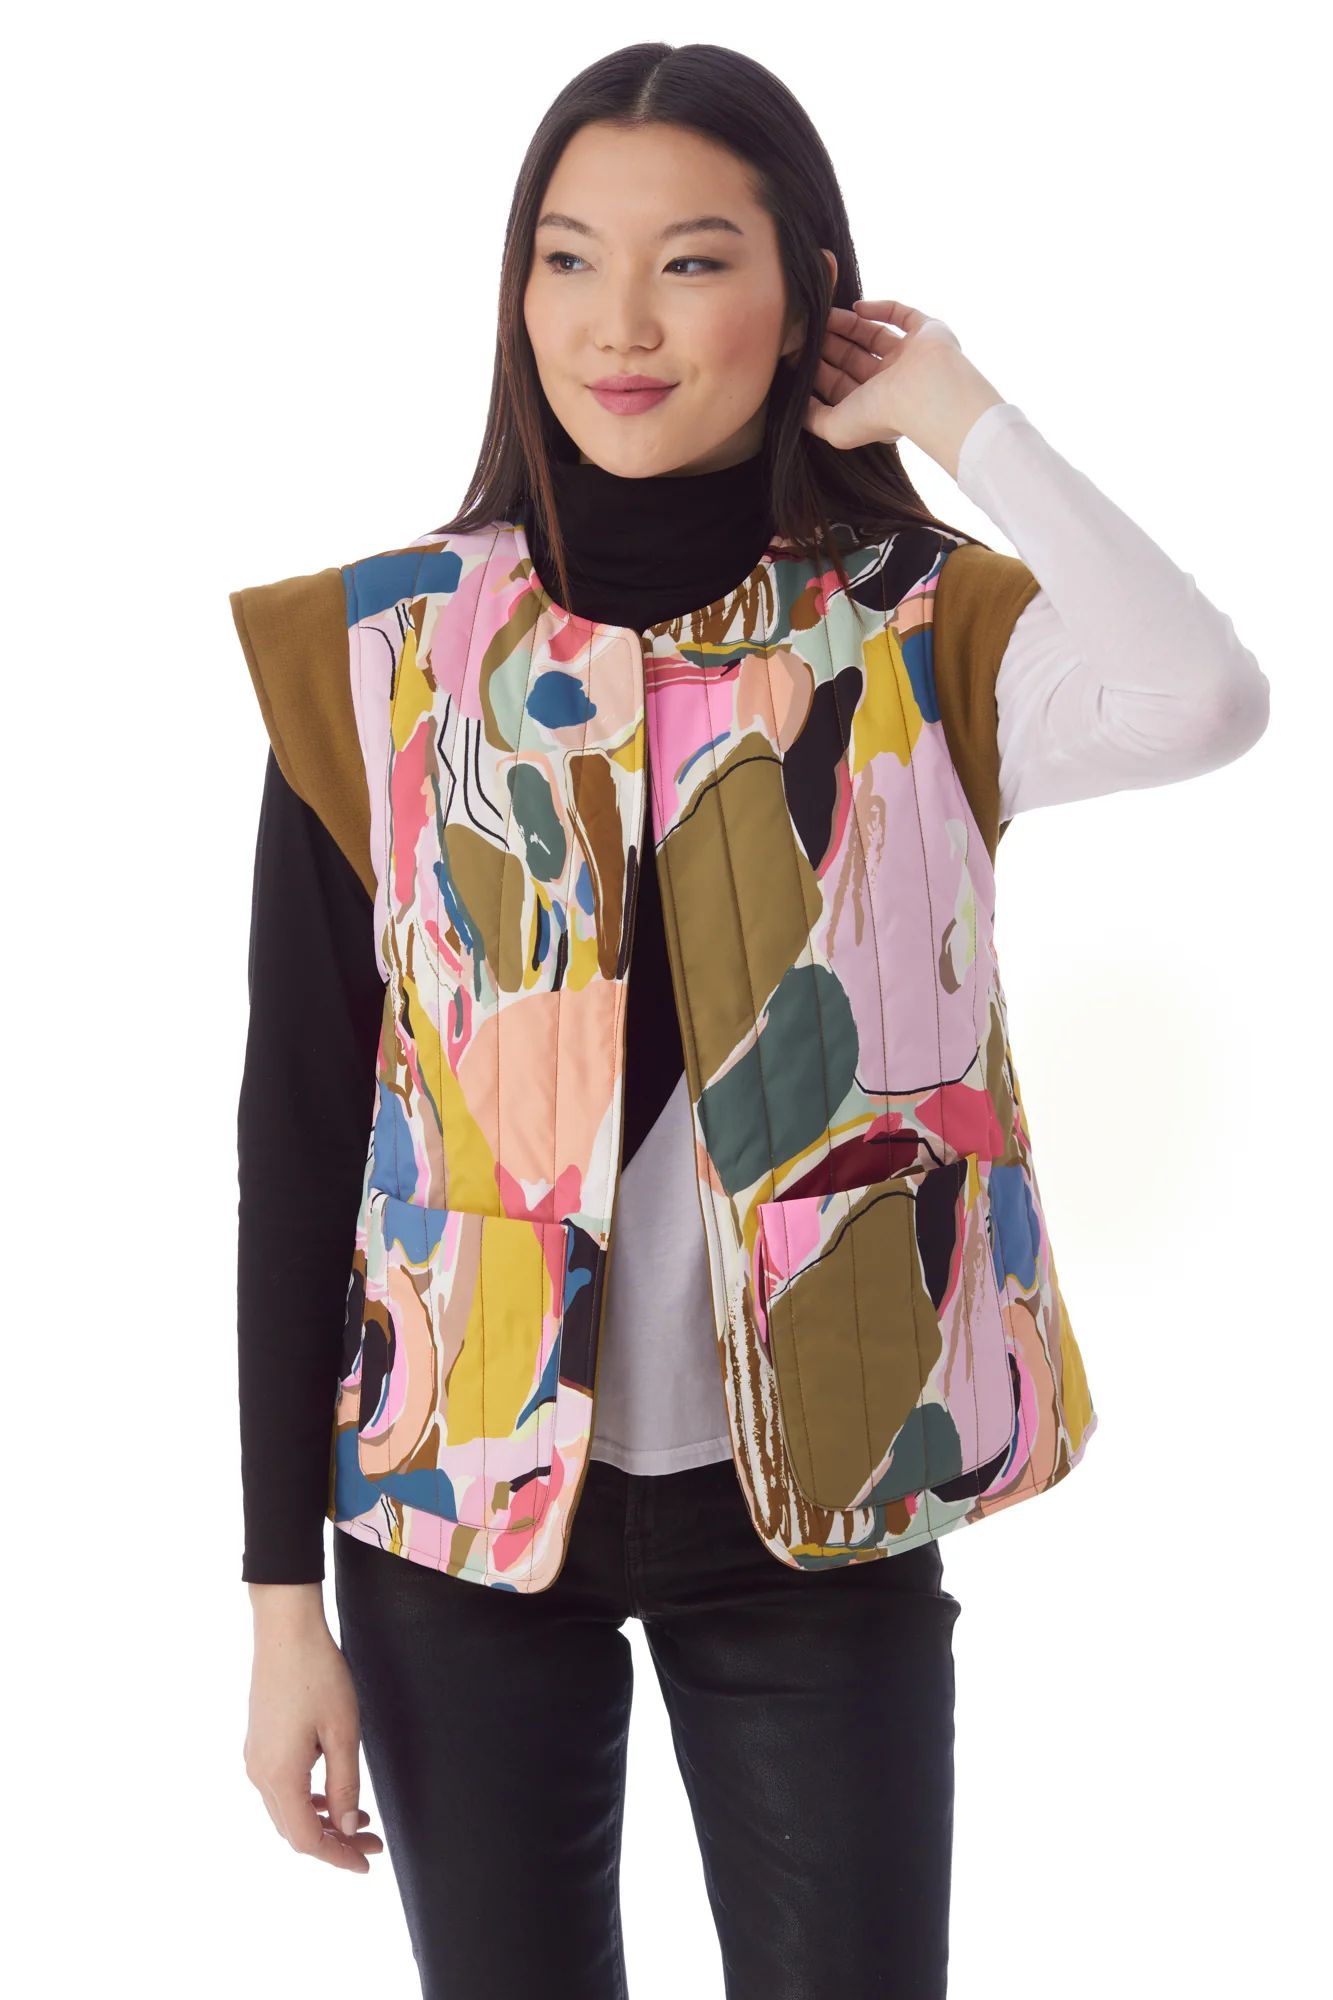 Viv Vest in Abstract Expression / Sepia | CROSBY by Mollie Burch | CROSBY by Mollie Burch